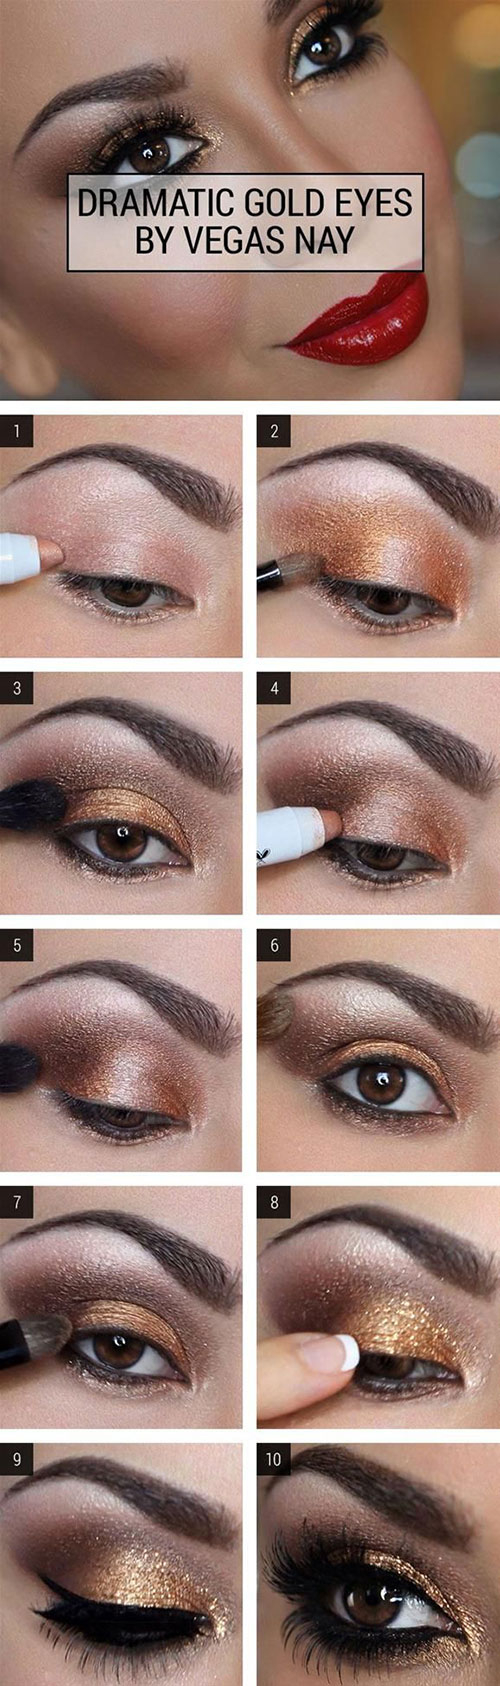 Eye Makeup For A Gold Dress How To Do Smokey Eye Makeup Top 10 Tutorial Pictures For 2019